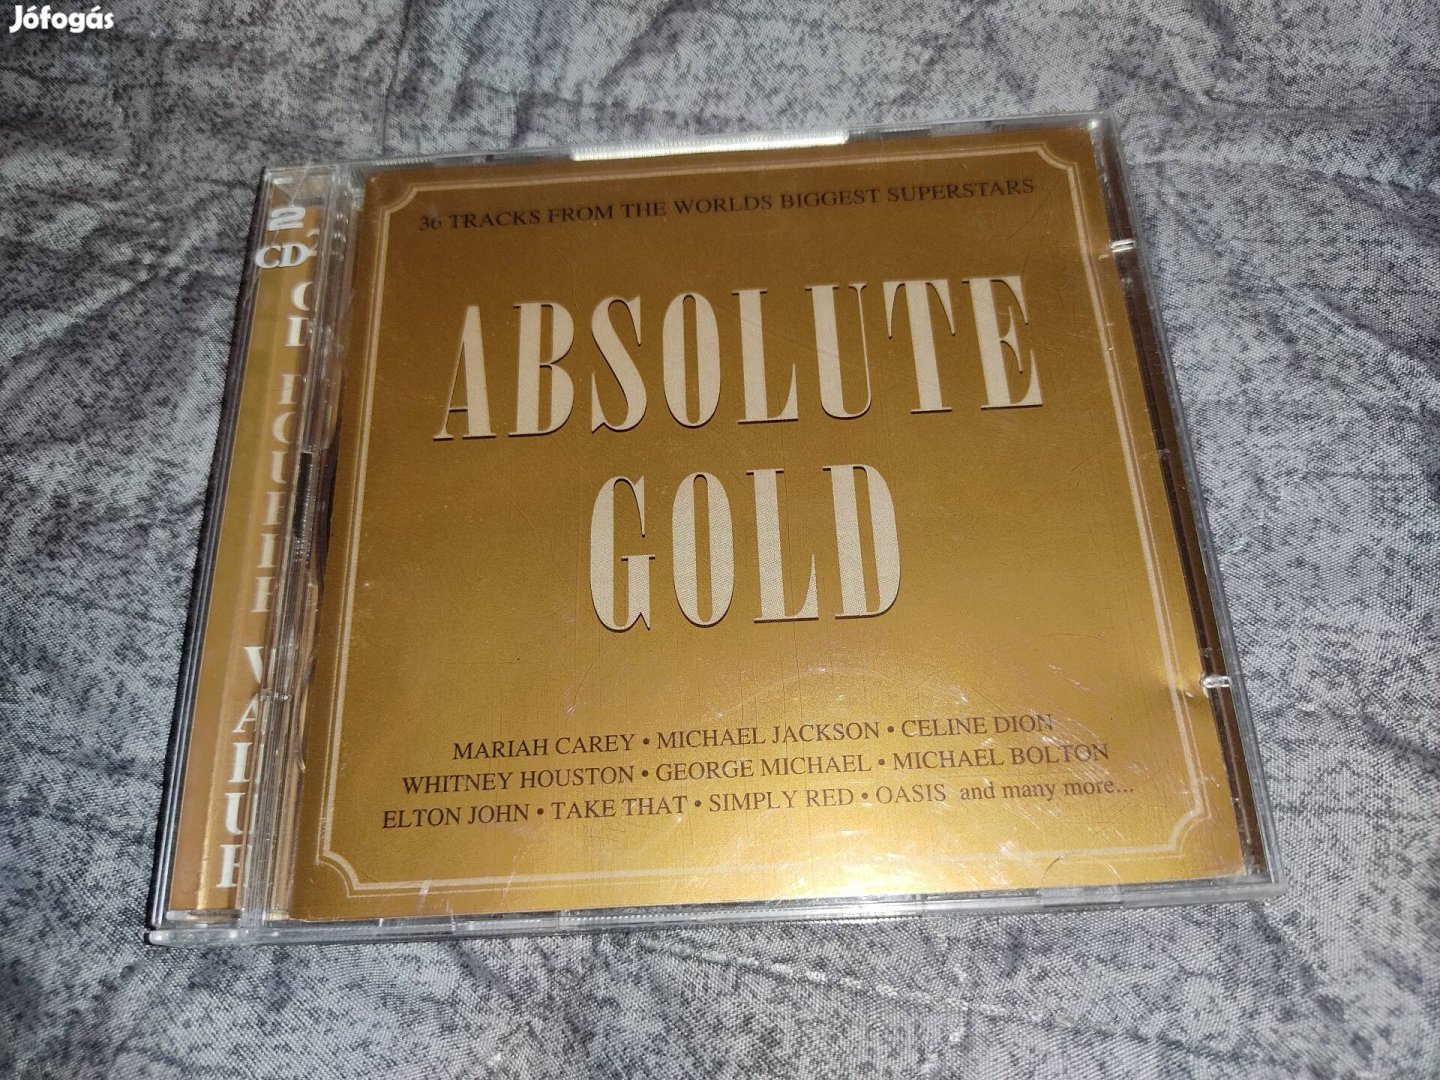 Absolute Gold (2CD)(Michael Jackson,Queen,George Michael)